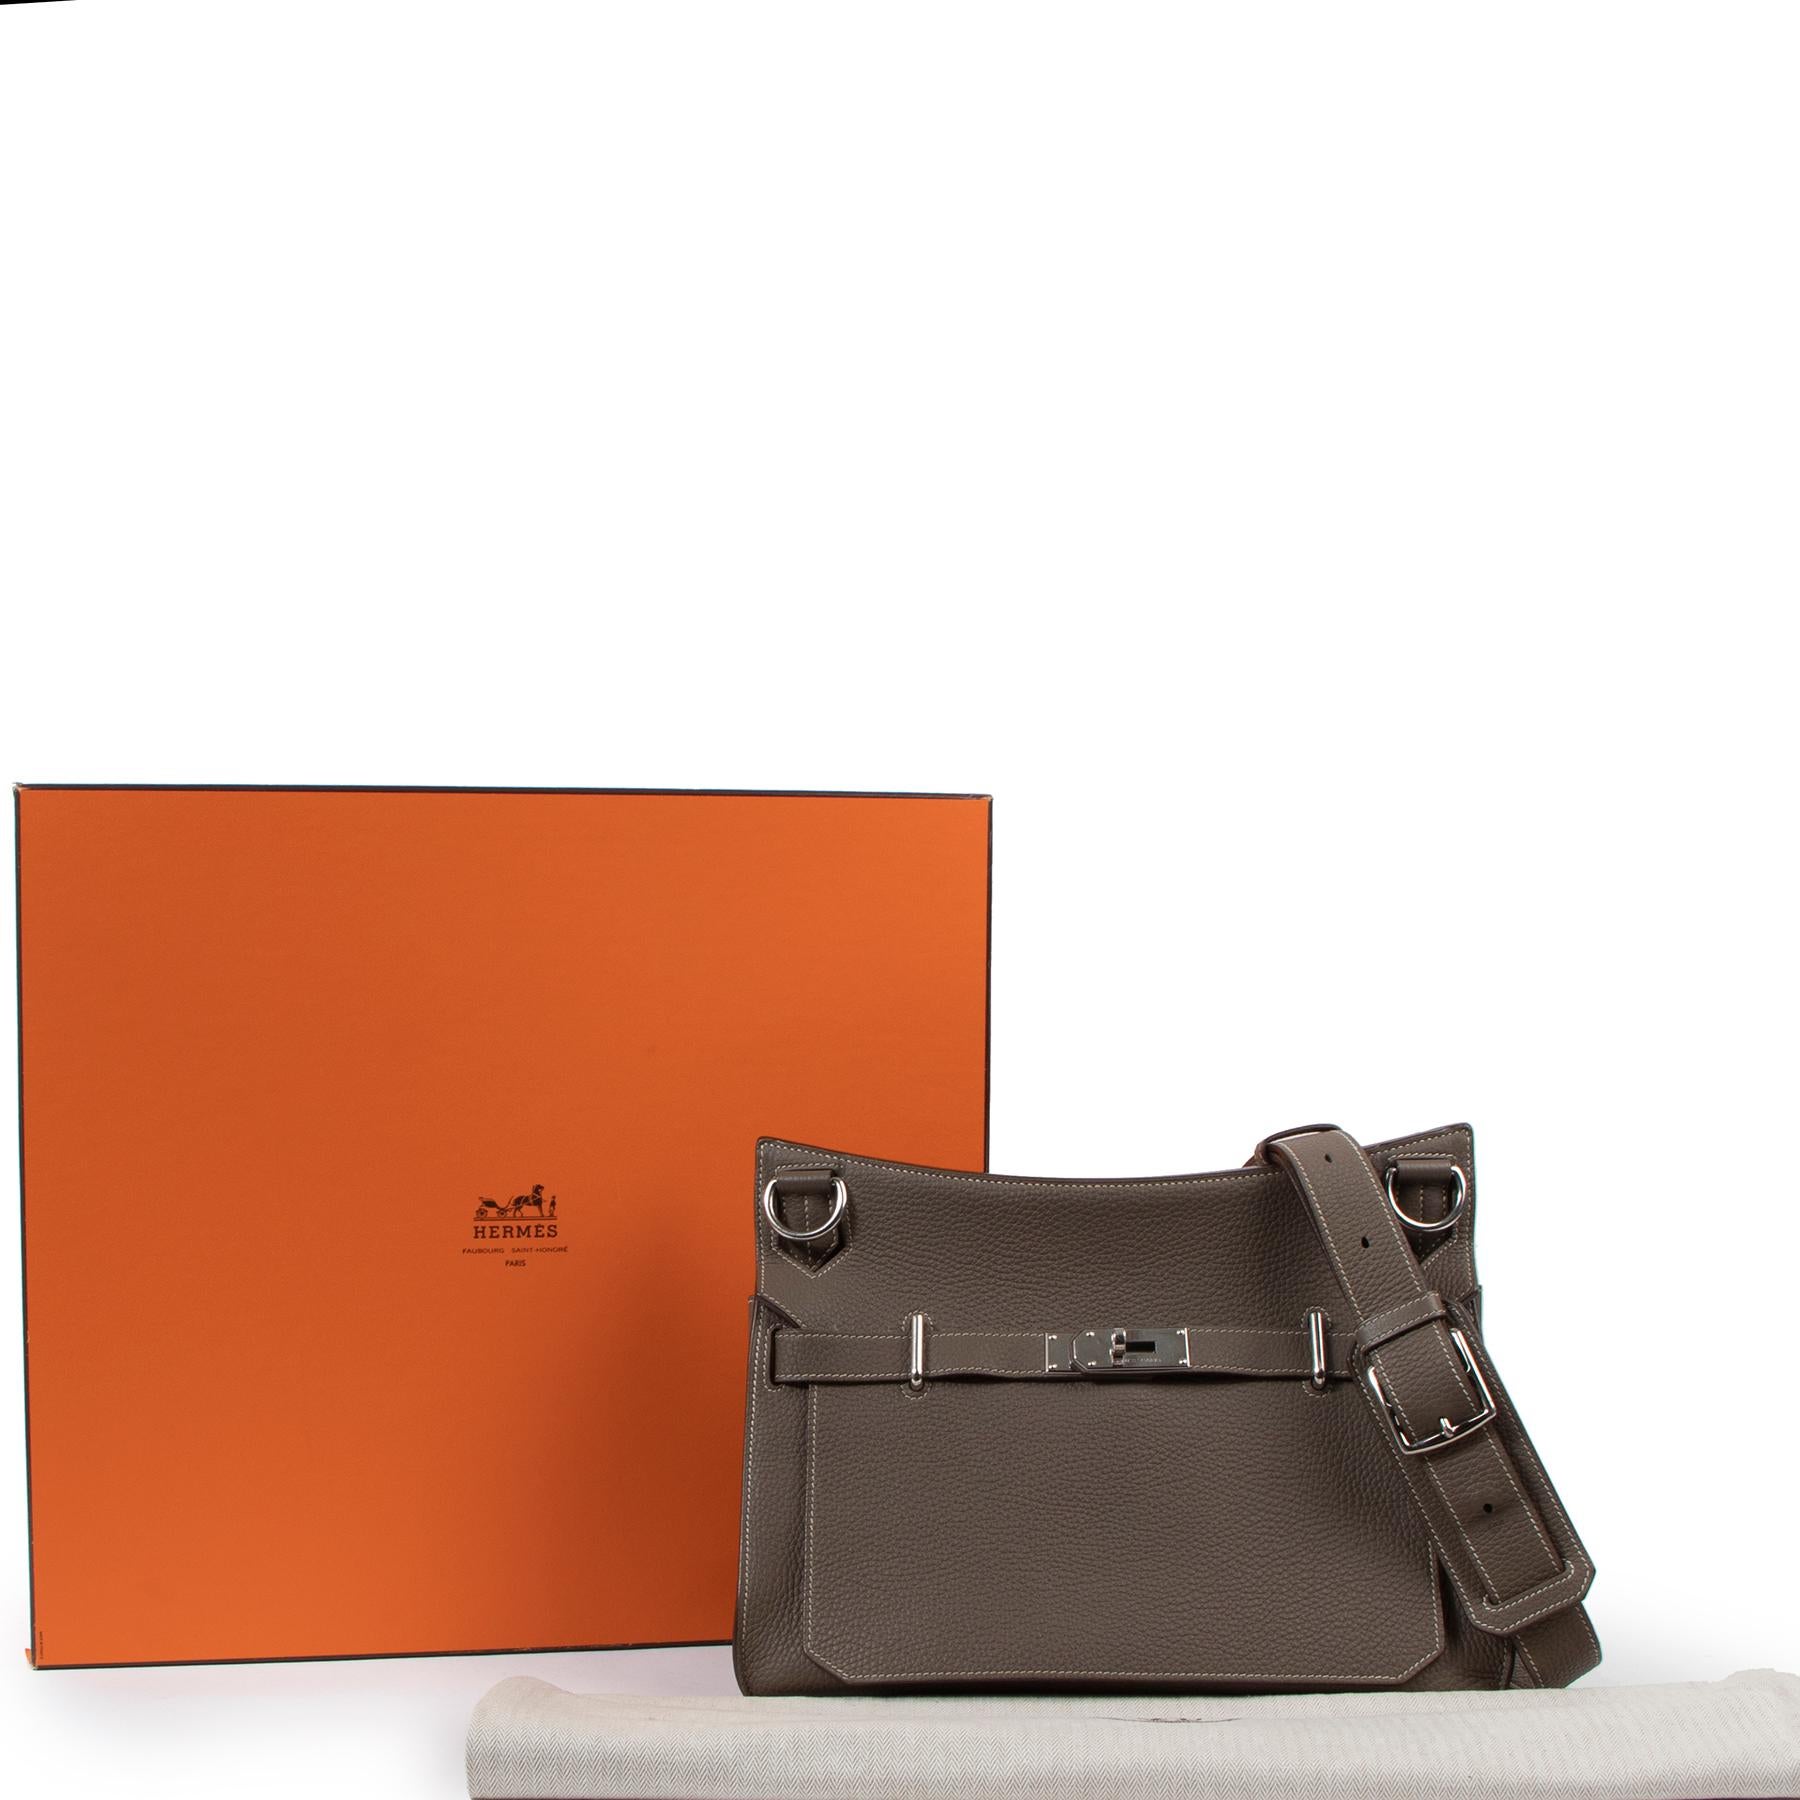 Hermès Jypsière 34 Etoupe Taurillon Clemence Palladium Hardware

The perfect balance between style and comfort, this Hermès Jypsière will make sure you have both! The softly pebbled Clemence leather in the versatile colour Etoupe makes for a